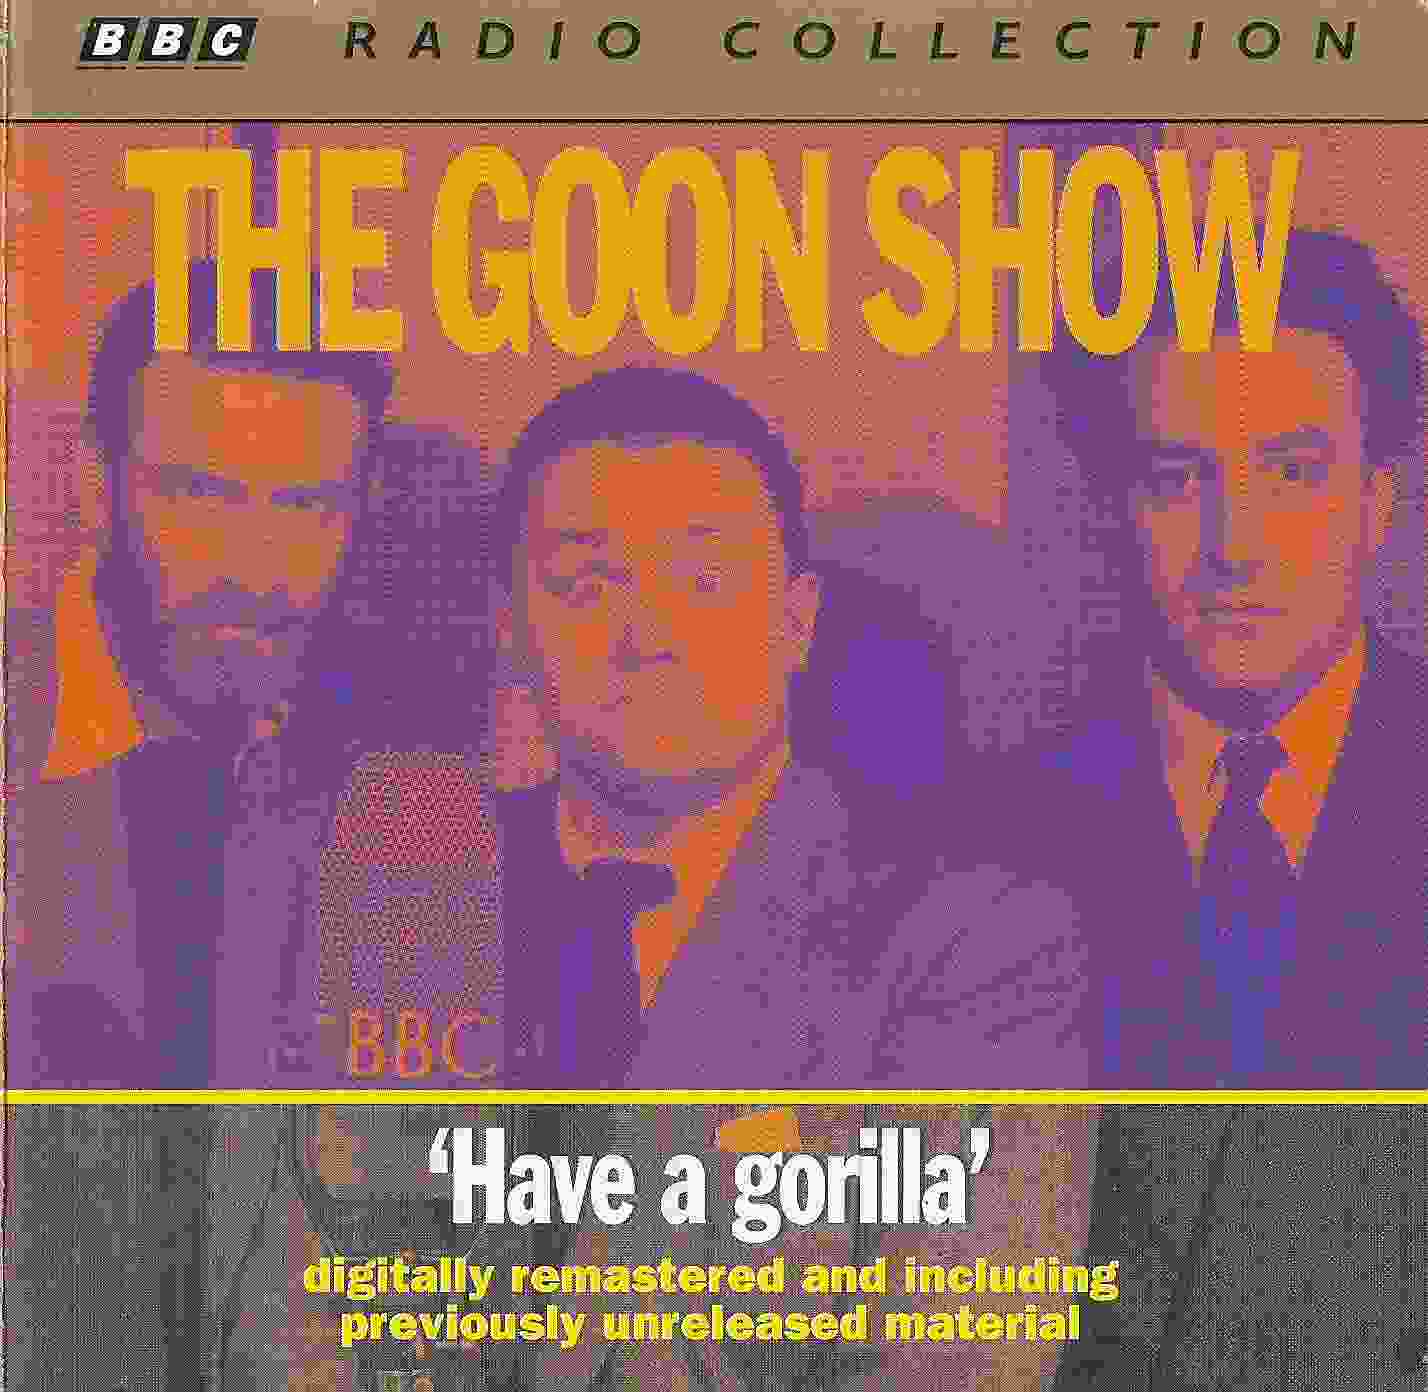 Picture of ZBBC 1869 CD The Goon show 6 - Have a gorilla by artist Spike Milligan / Larry Stephens / Maurice Wiltshire from the BBC cds - Records and Tapes library